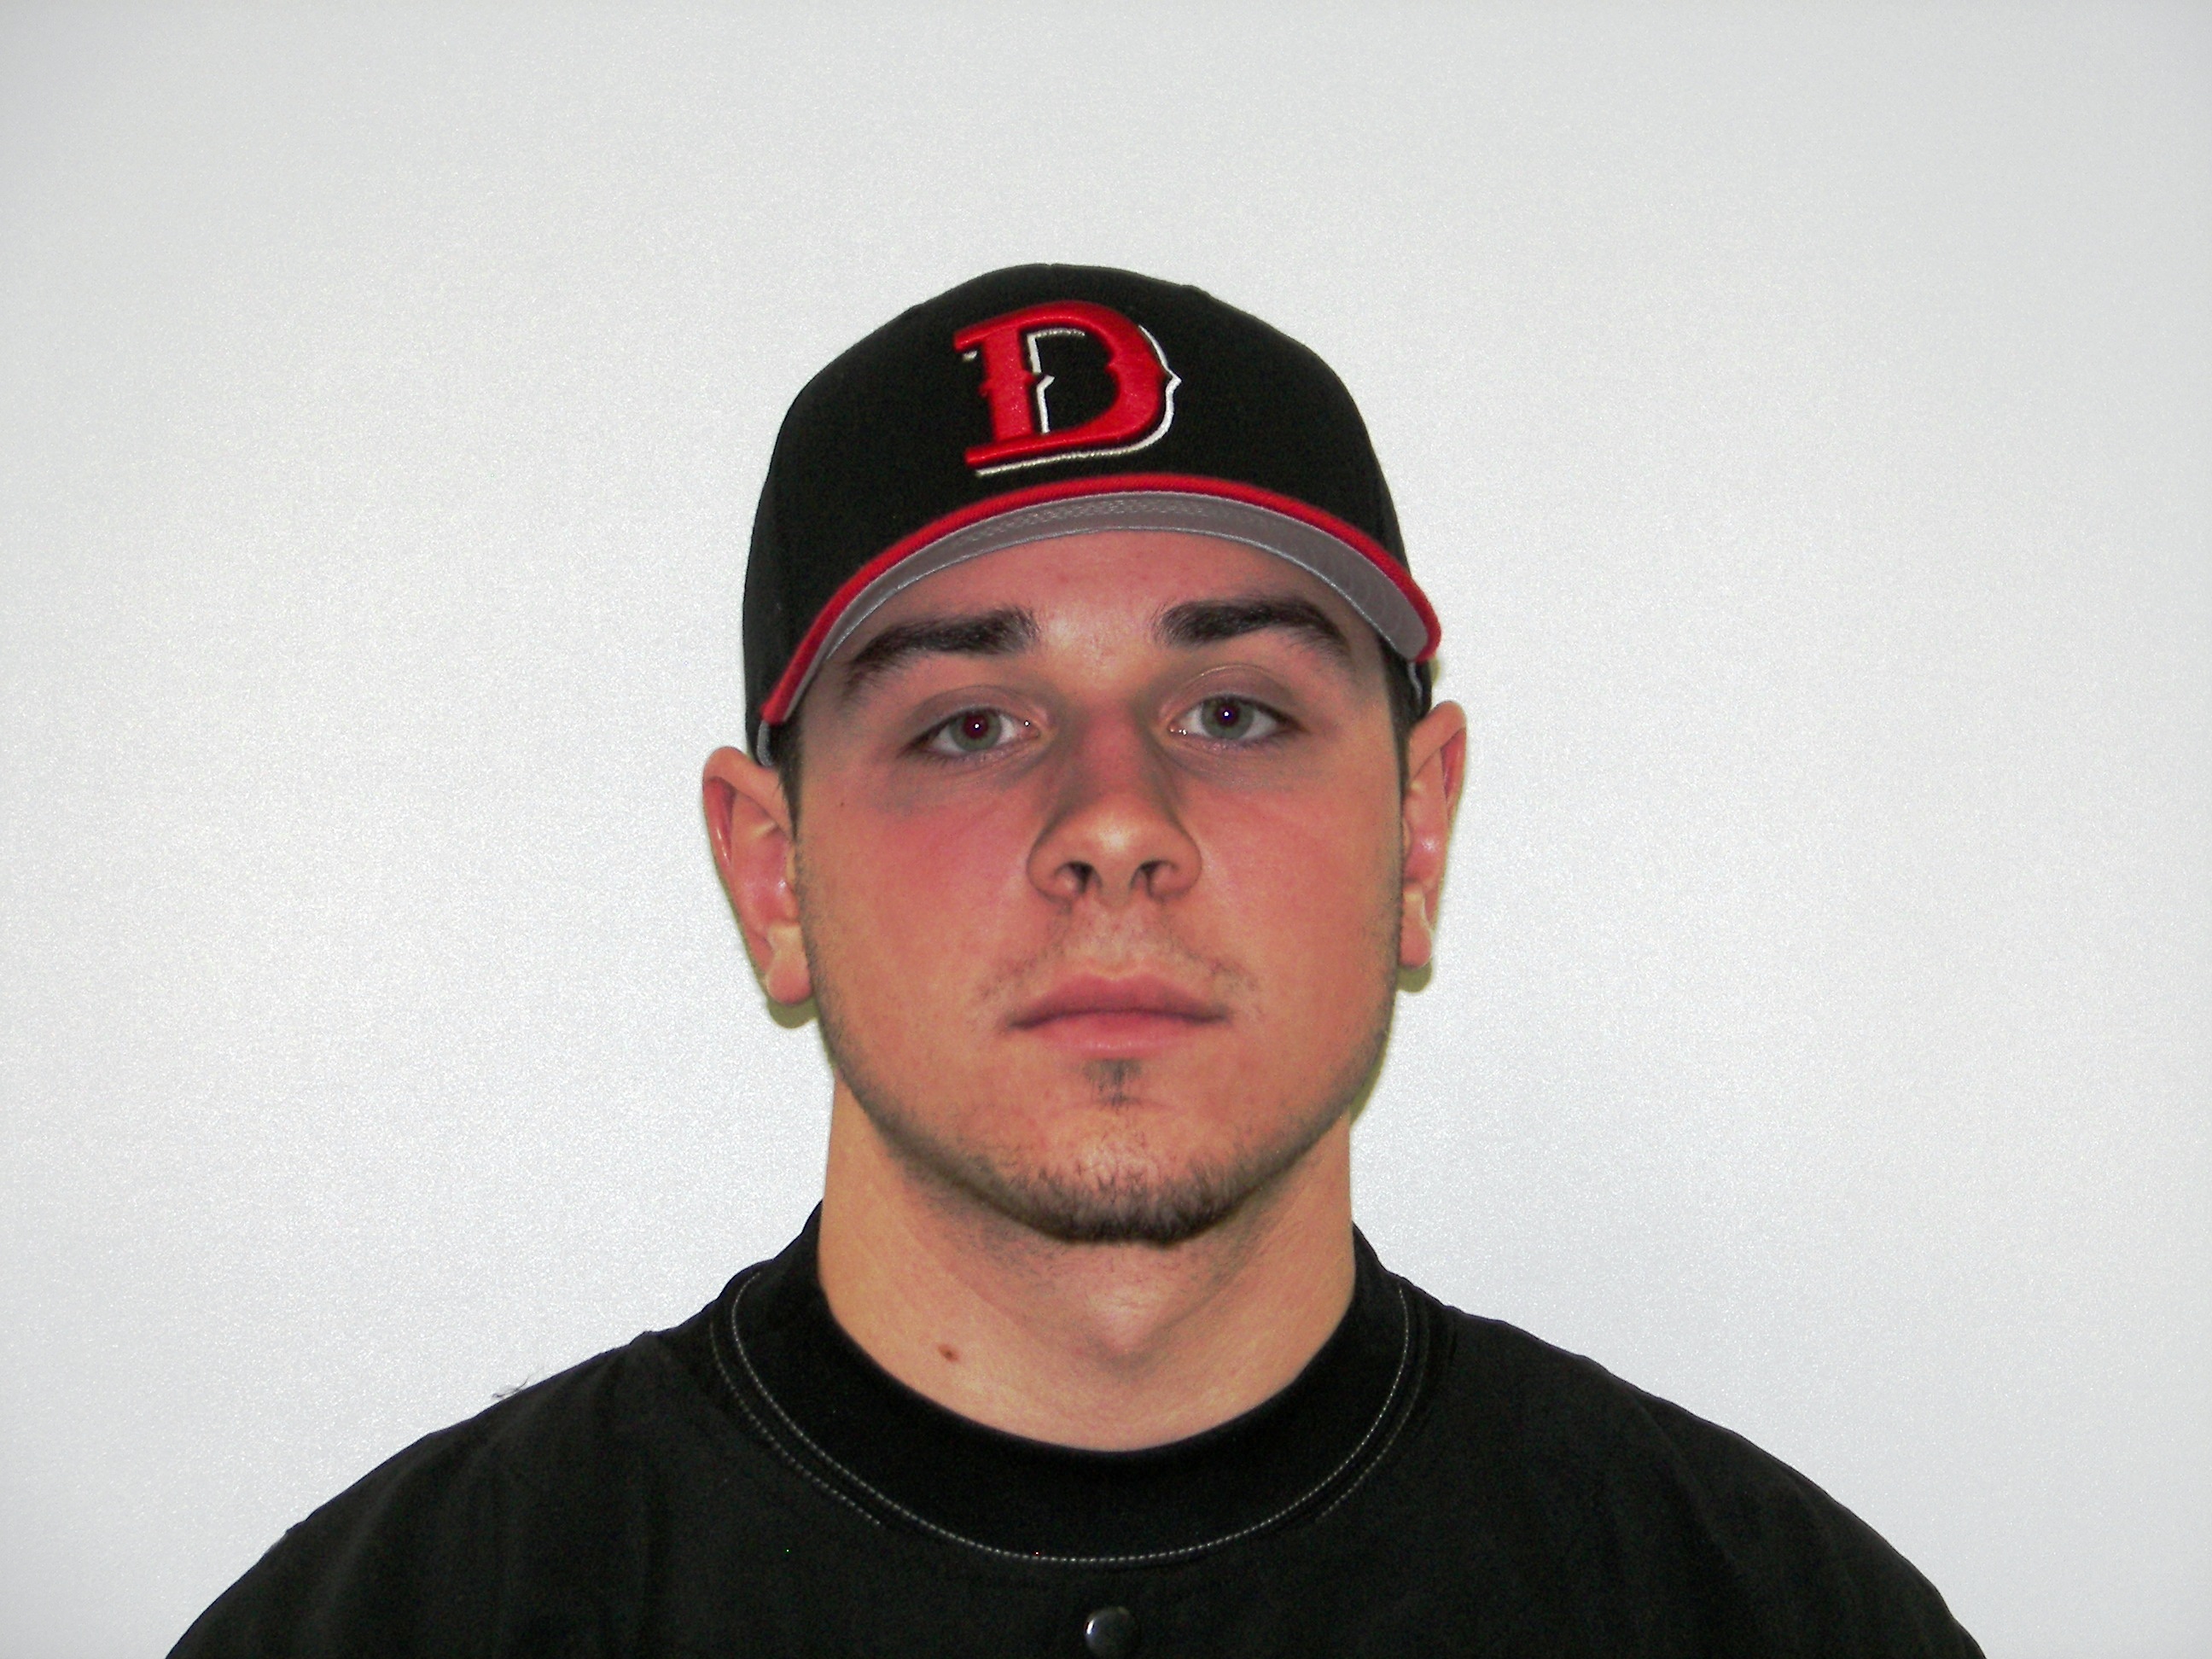 MOORE NAMED TO 2009 RAWLINGS/ABCA NCAA DIVISION II ALL-AMERICAN TEAM